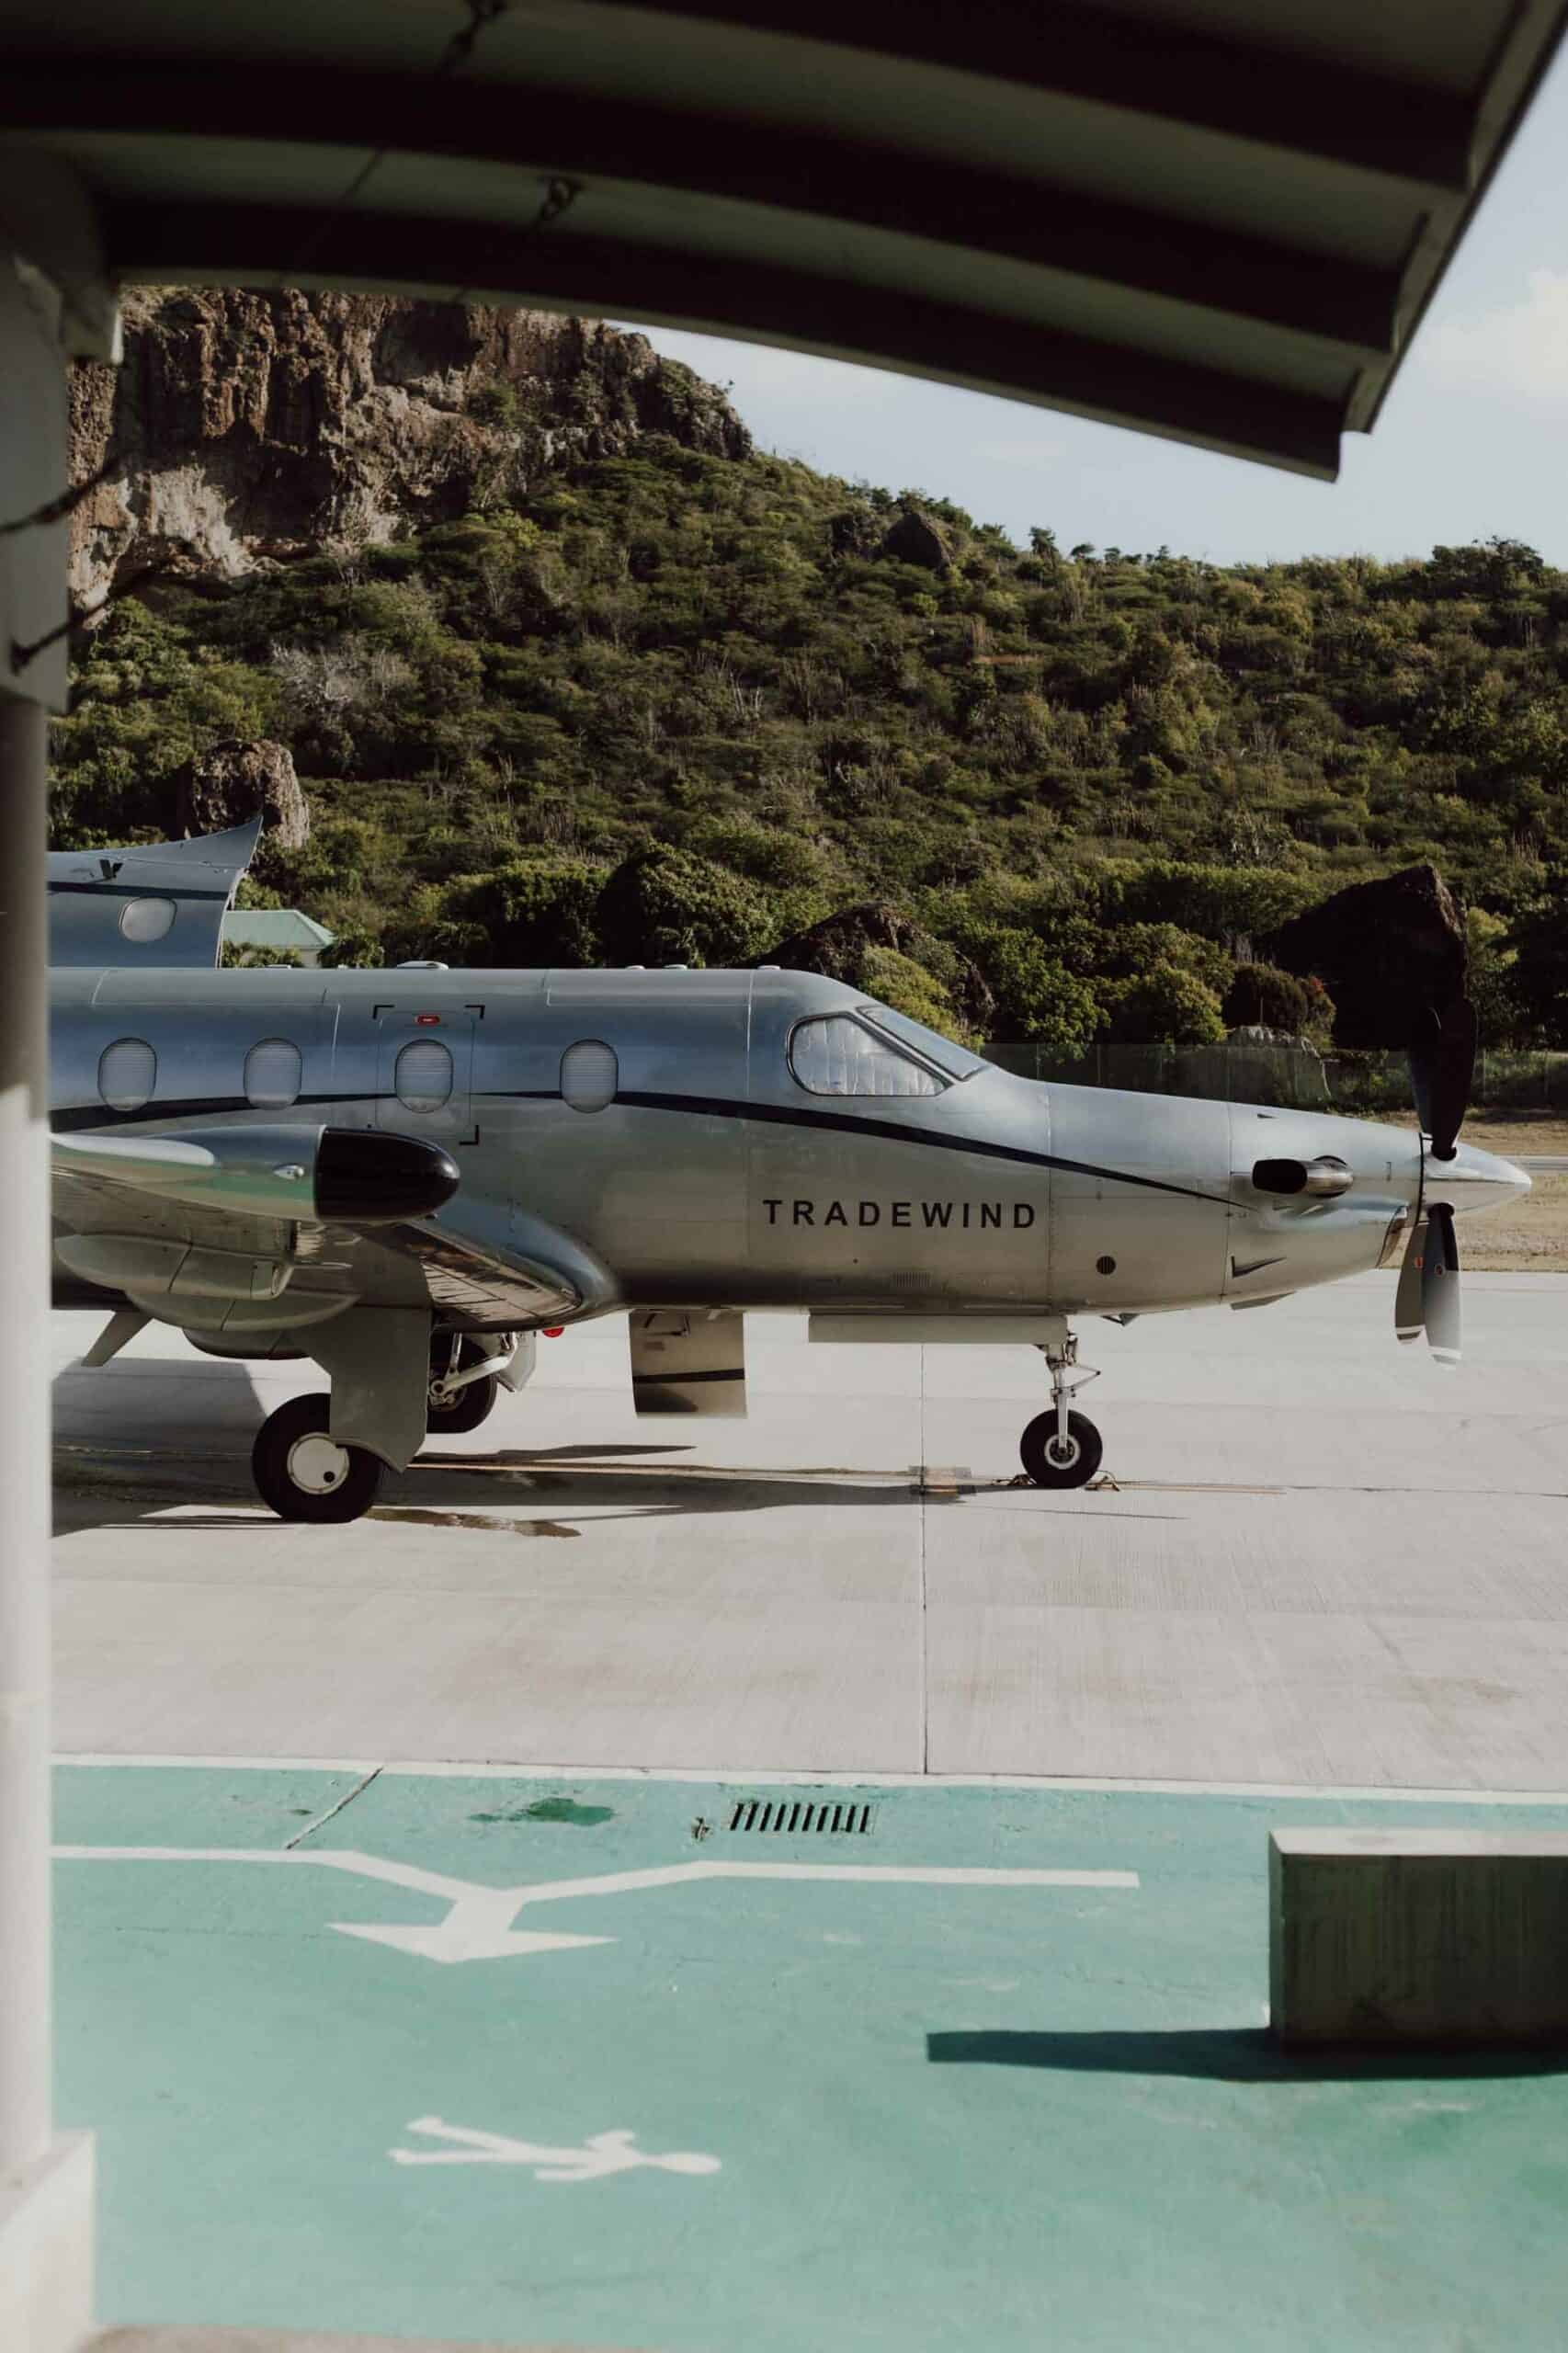 The Ultimate Guide to St Barths - Jetset